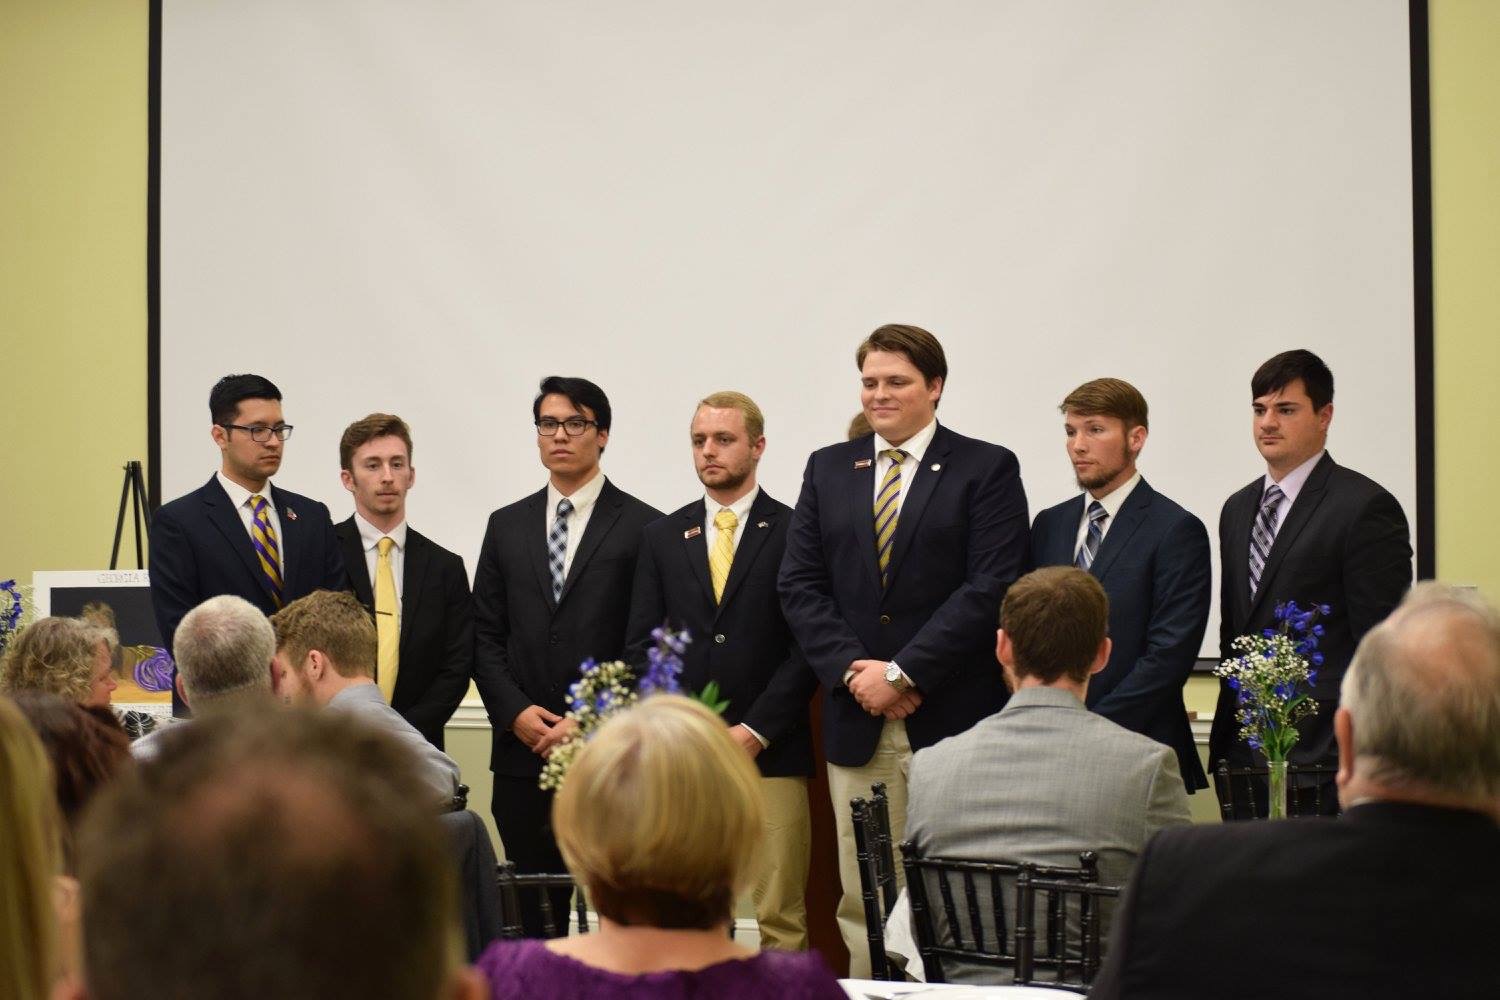 Members of the executive board for the Phi Alpha chapter of Sigma Alpha Epsilon at Armstrong State University